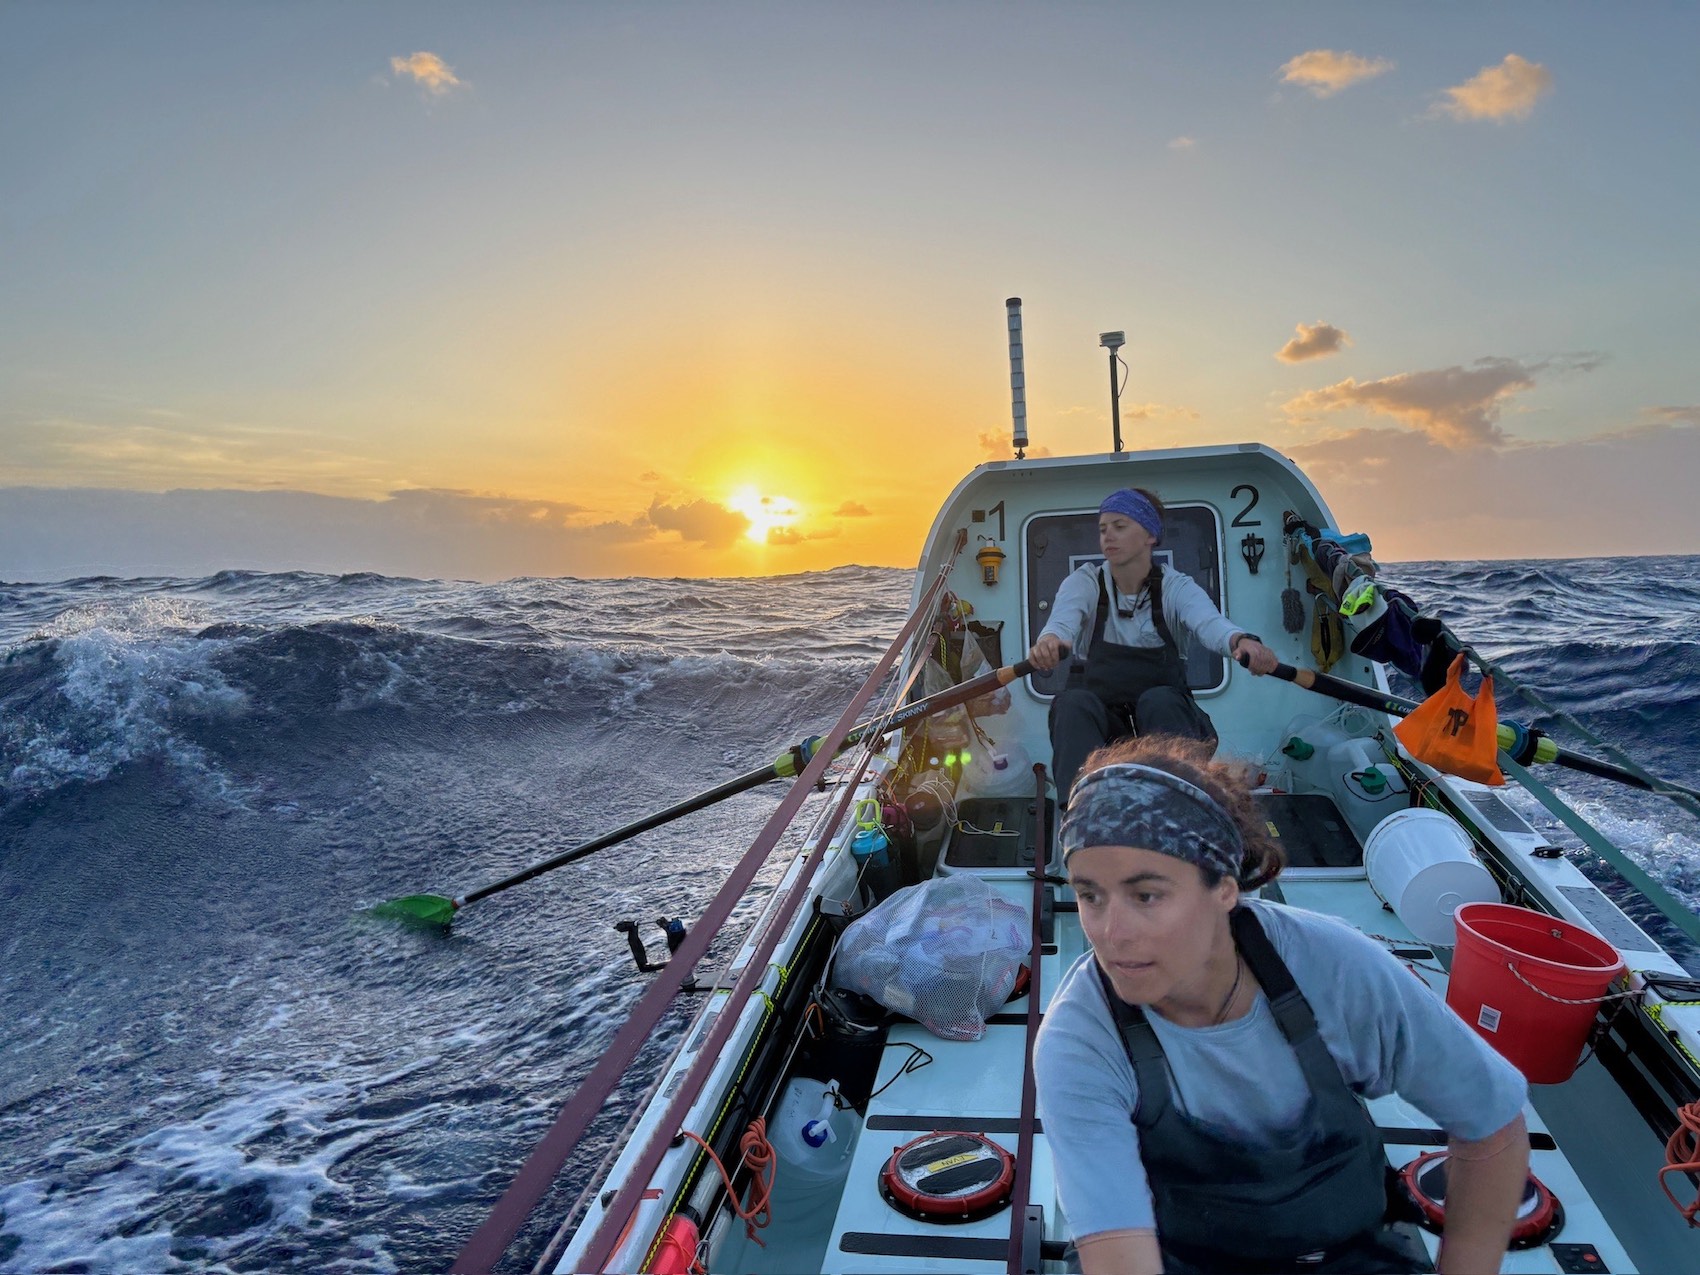 Two women row a boat with a cabin. Water bottles, buckets and other items are strapped into it. The boat rises on a wave as it heads toward a golden sunset.